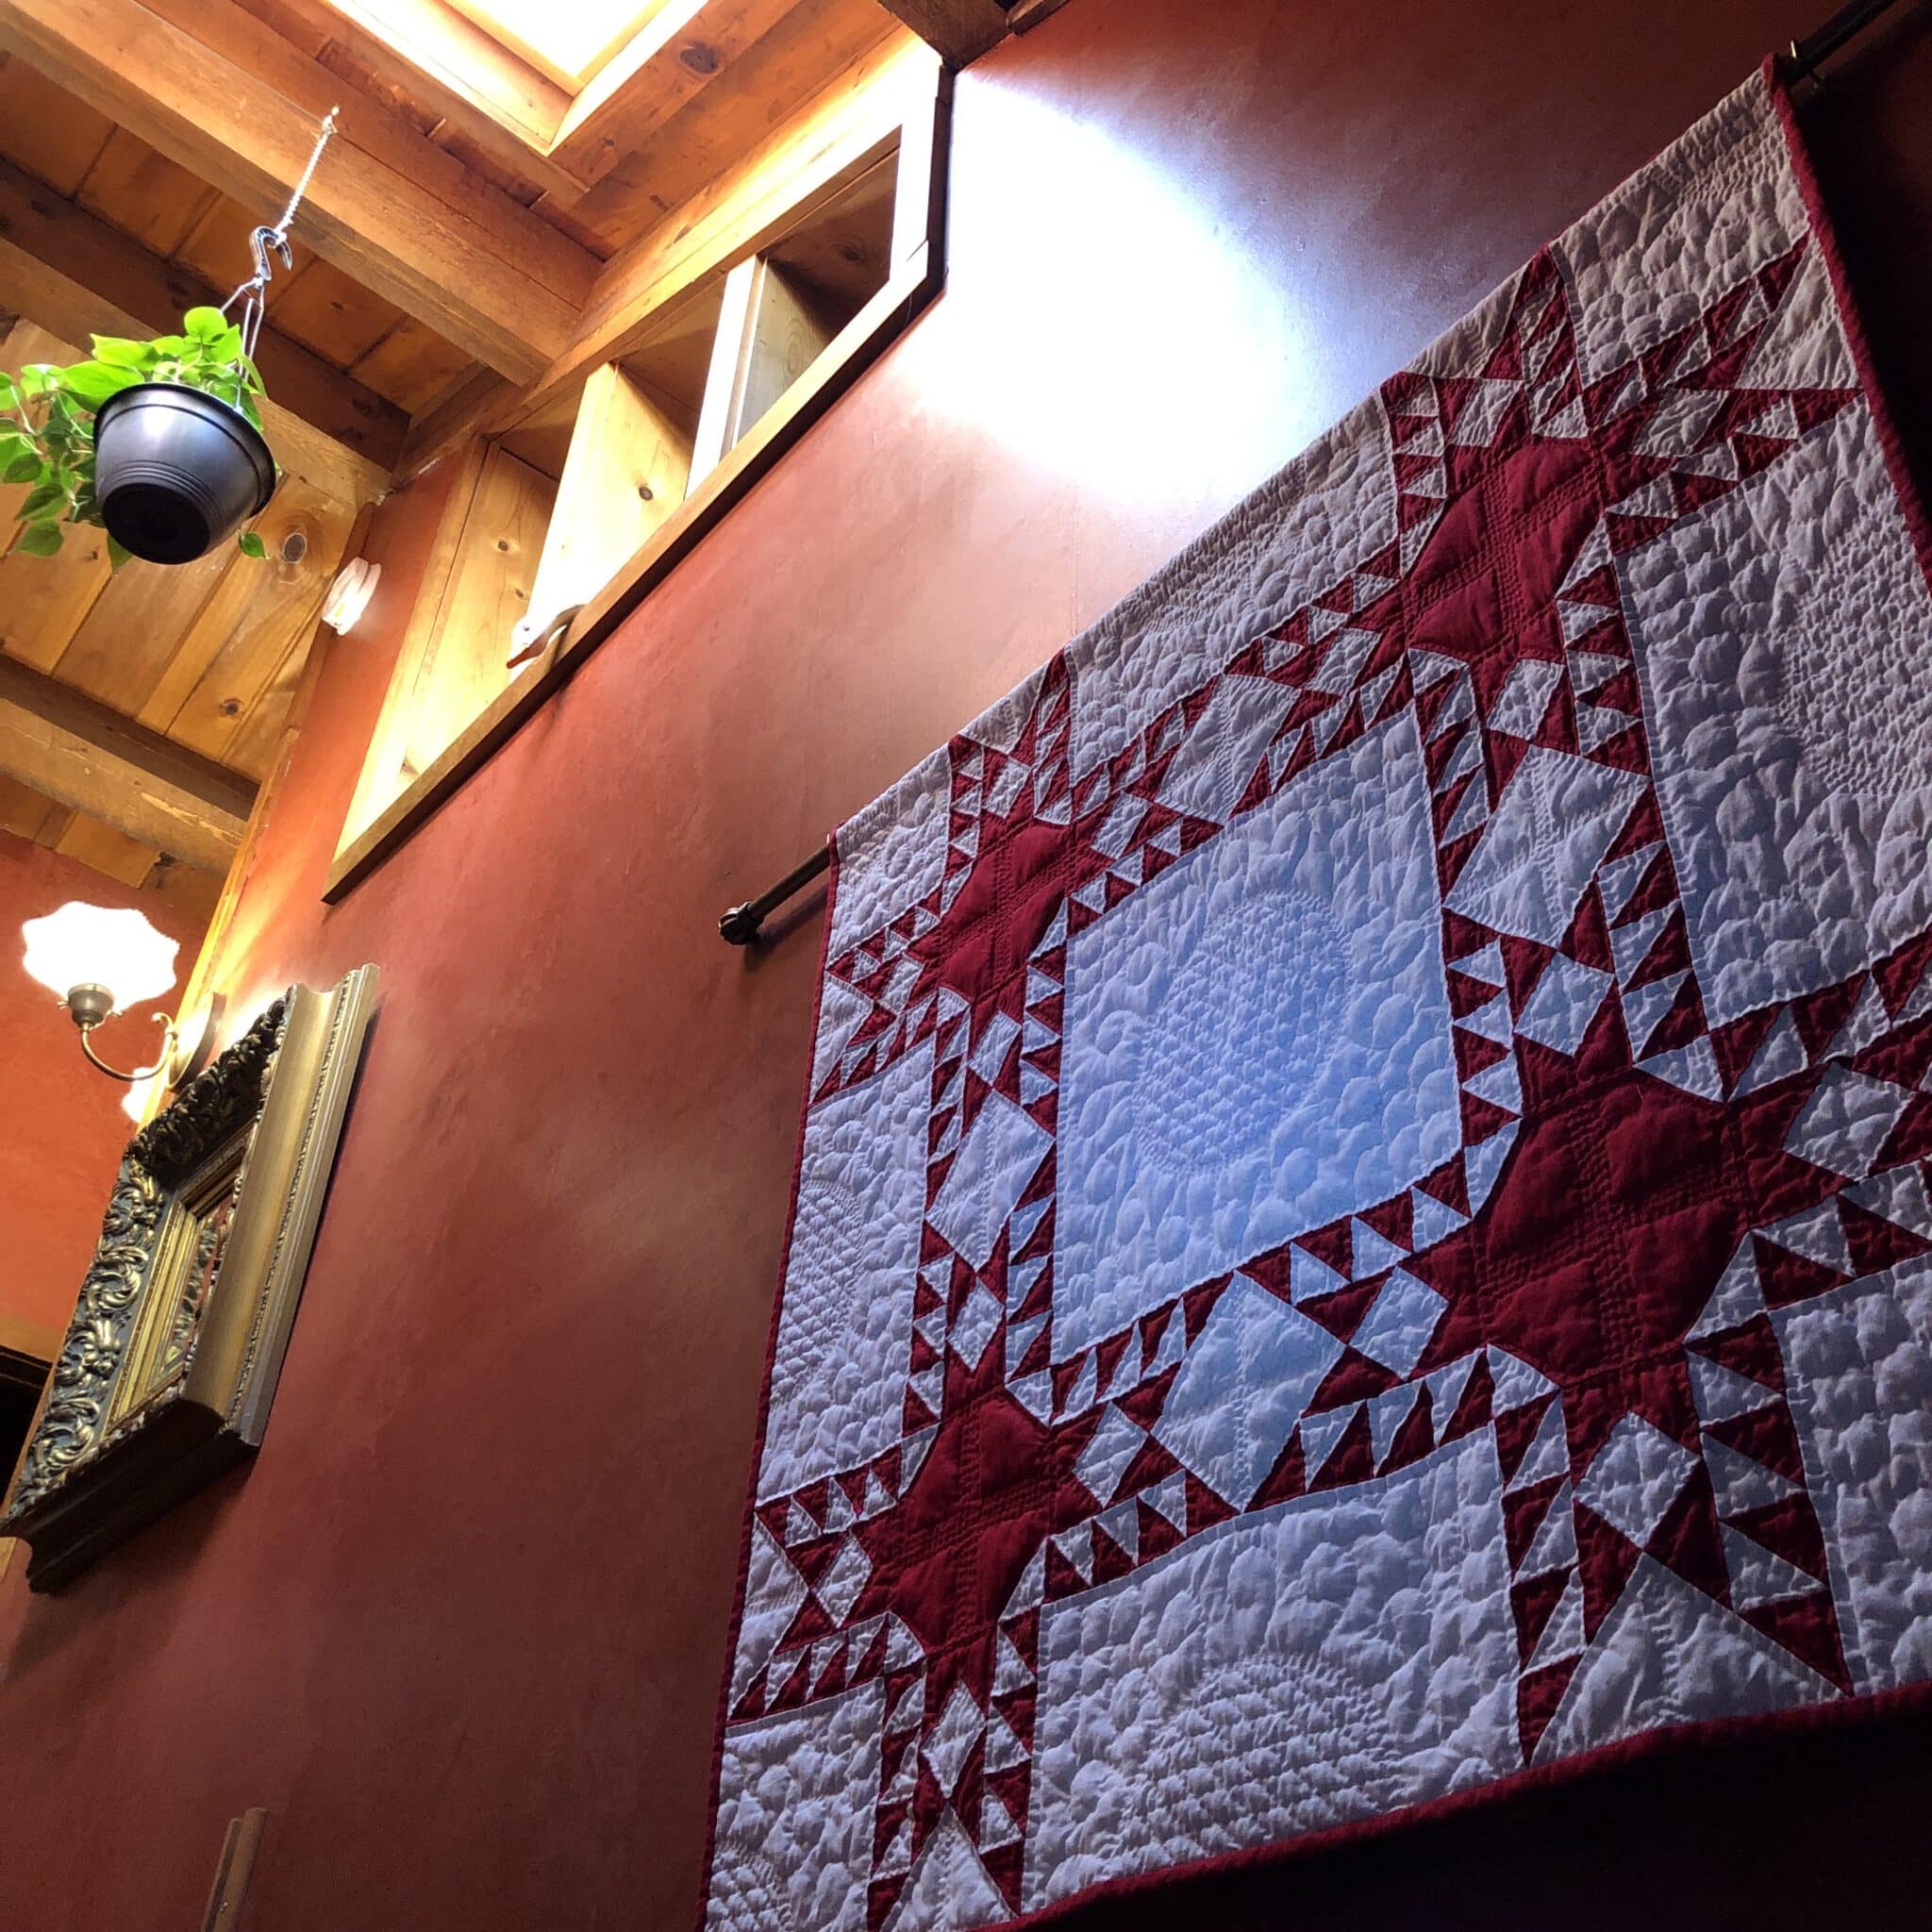 Hanging on the stairwell wall is an antique quilt sampler in red and white patchwork fabrics.